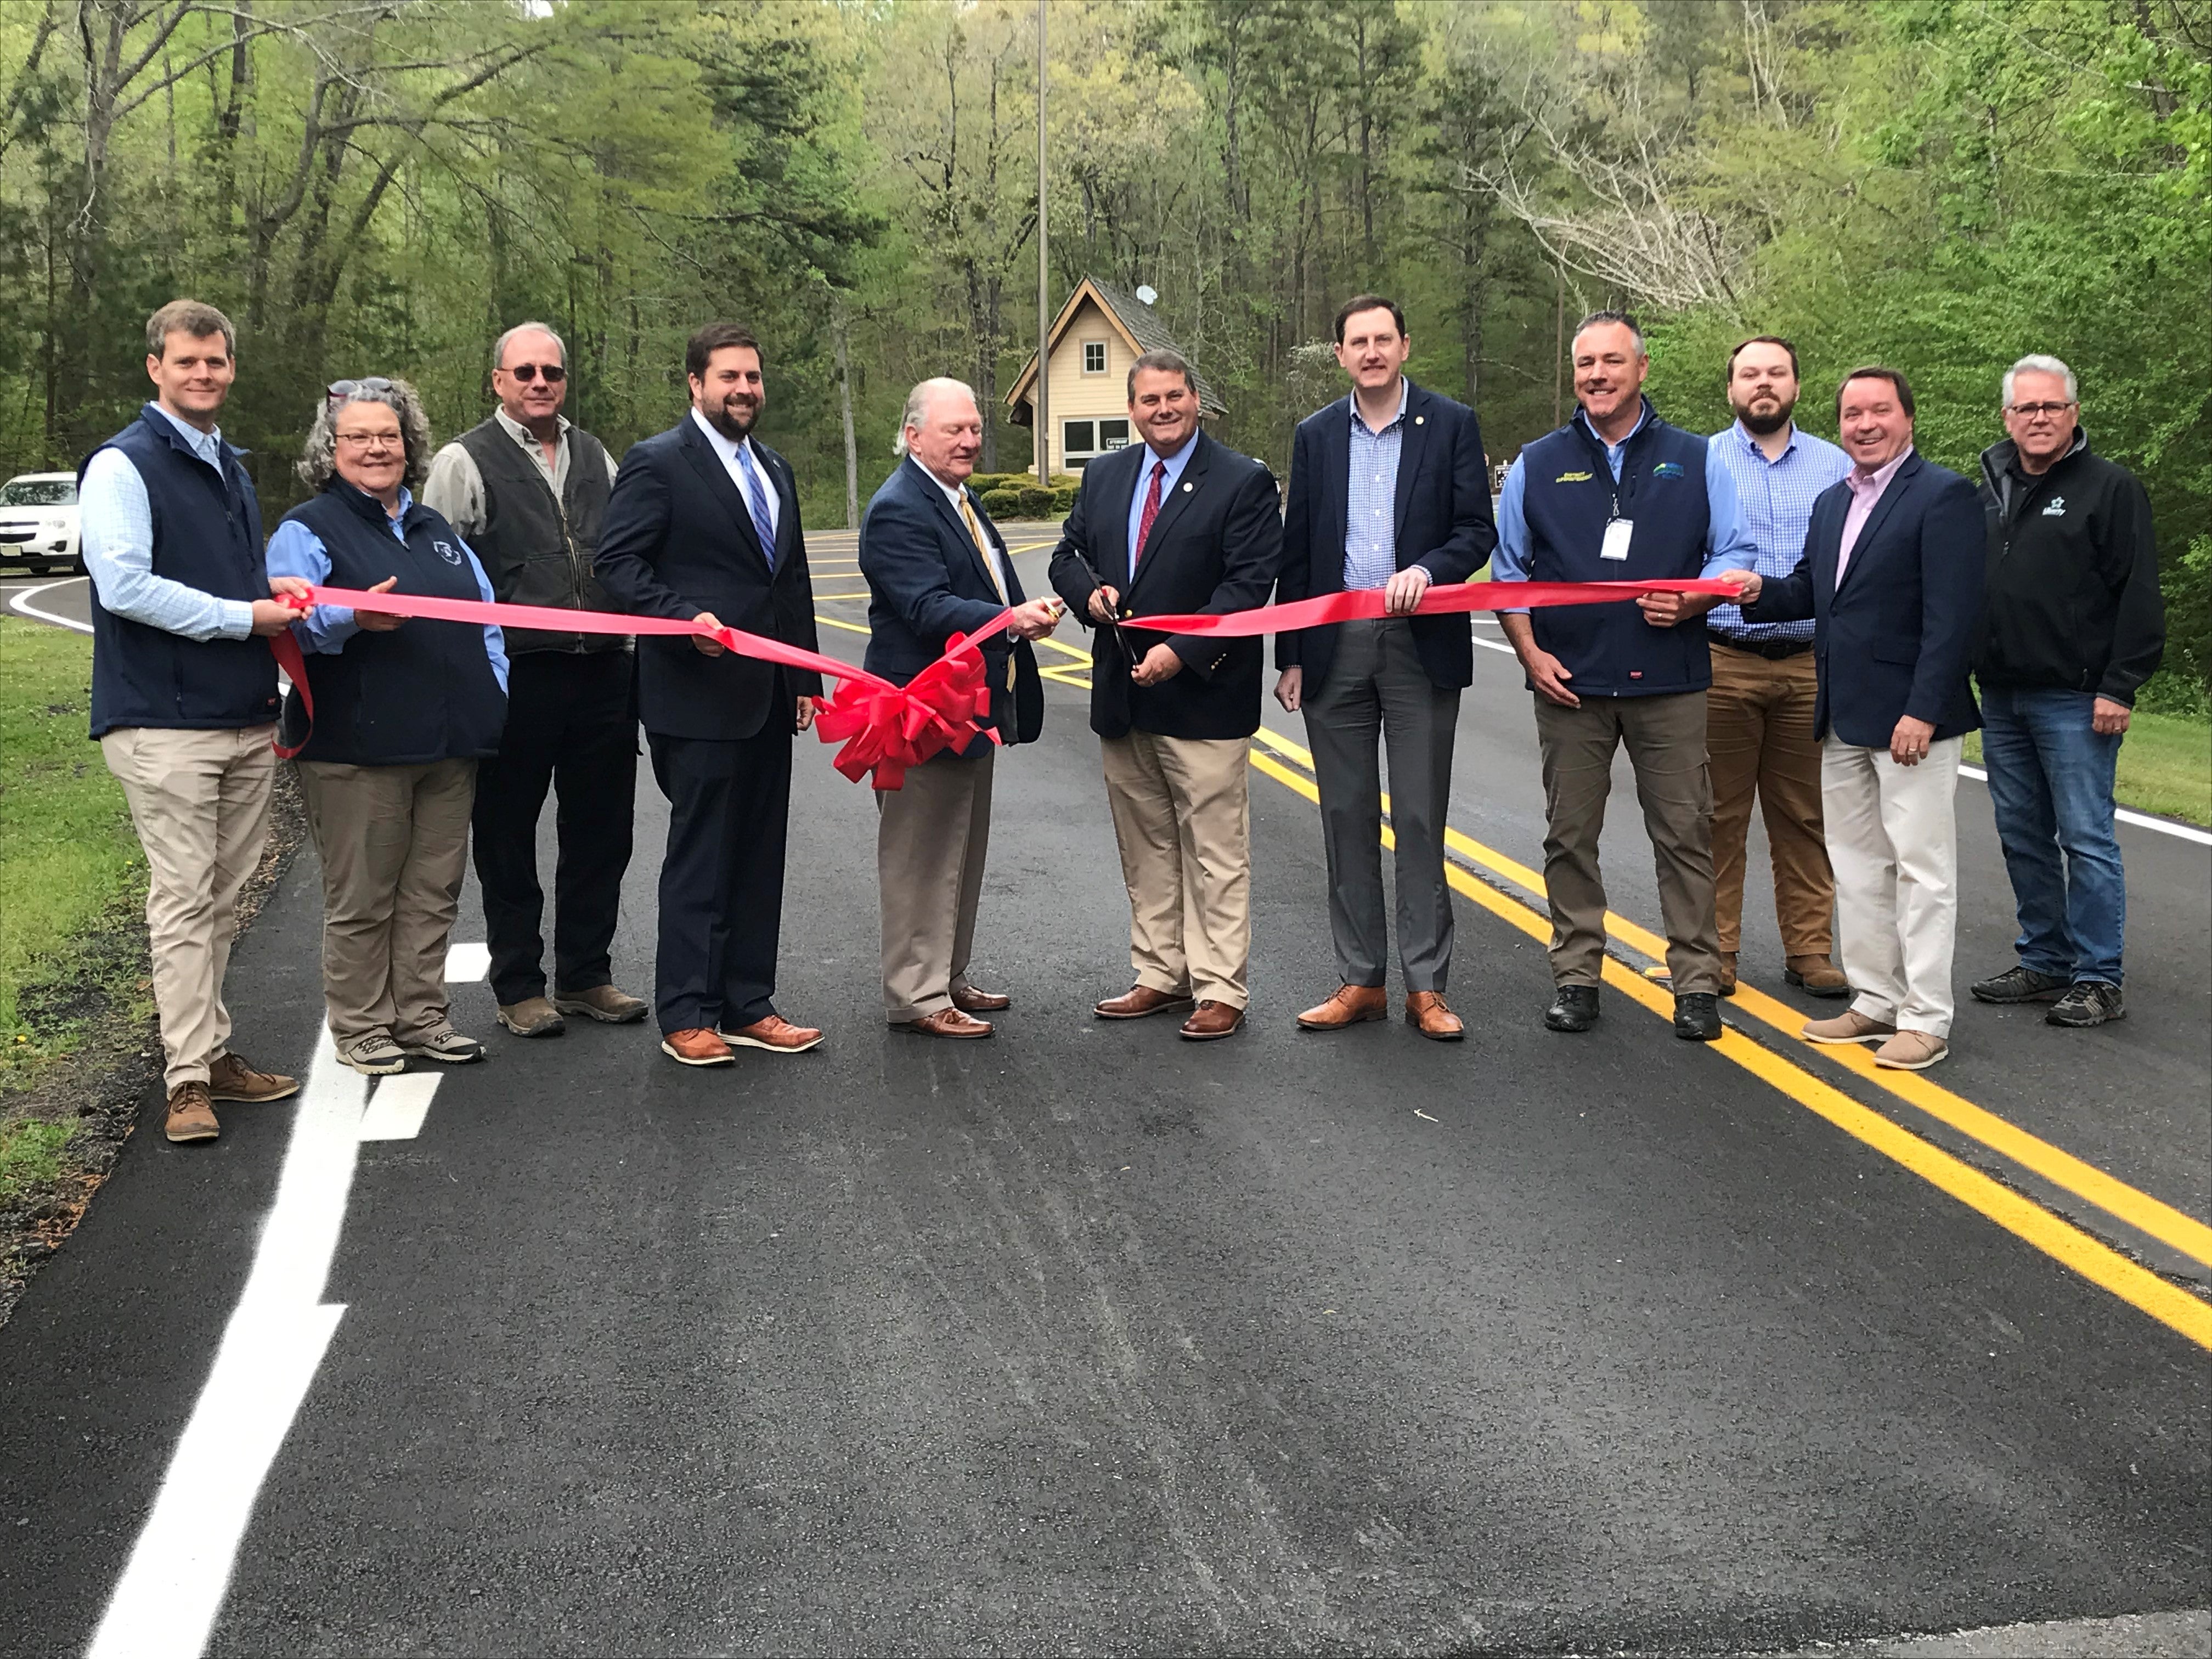 Roads and Parking Areas at Lake Guntersville State Park Paved with Longer-lasting Asphalt Made from Recycled Tires